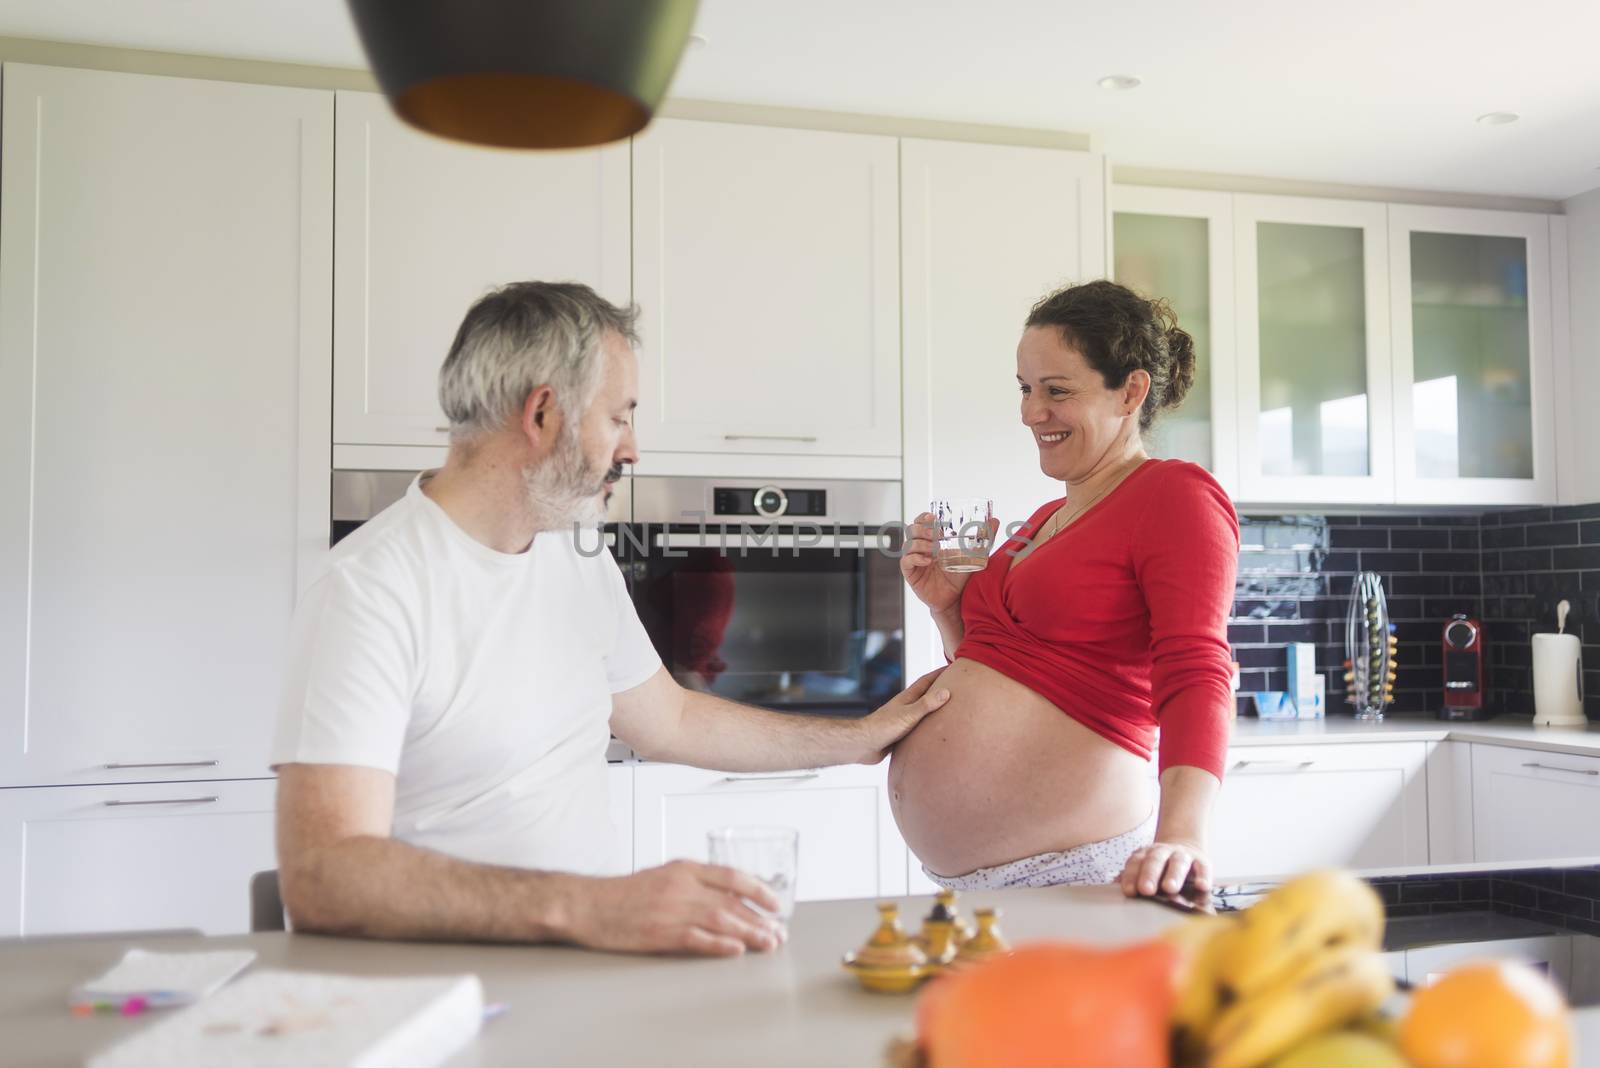 Portrait of smiling laughing white Caucasian couple two people, pregnant woman with husband in the kitchen, lifestyle healthy pregnancy happy life concept